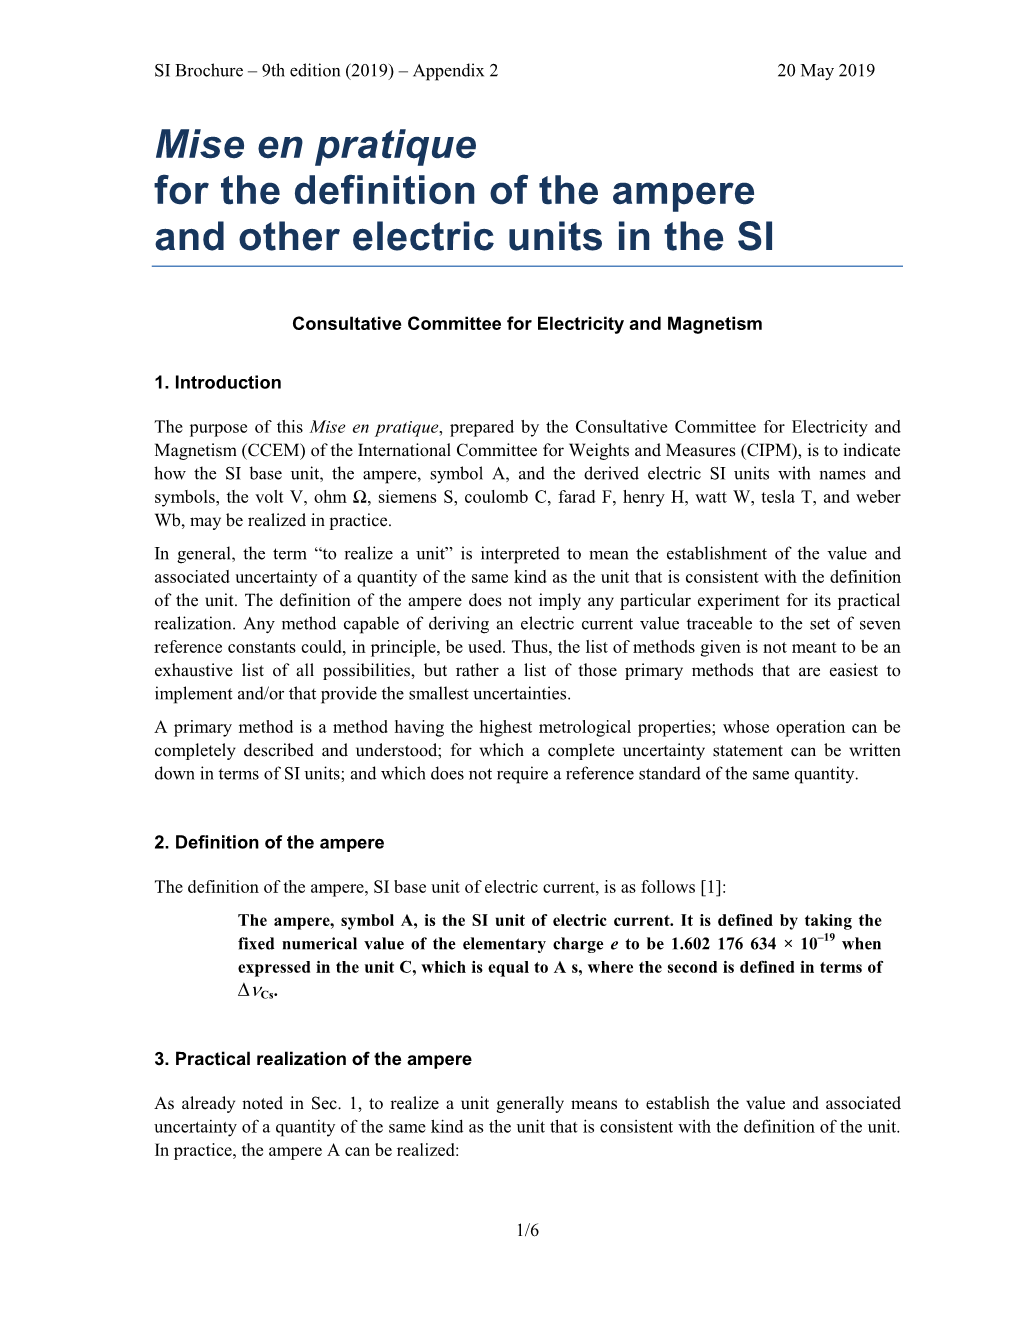 Mise En Pratique for the Definition of the Ampere and Other Electric Units in the SI